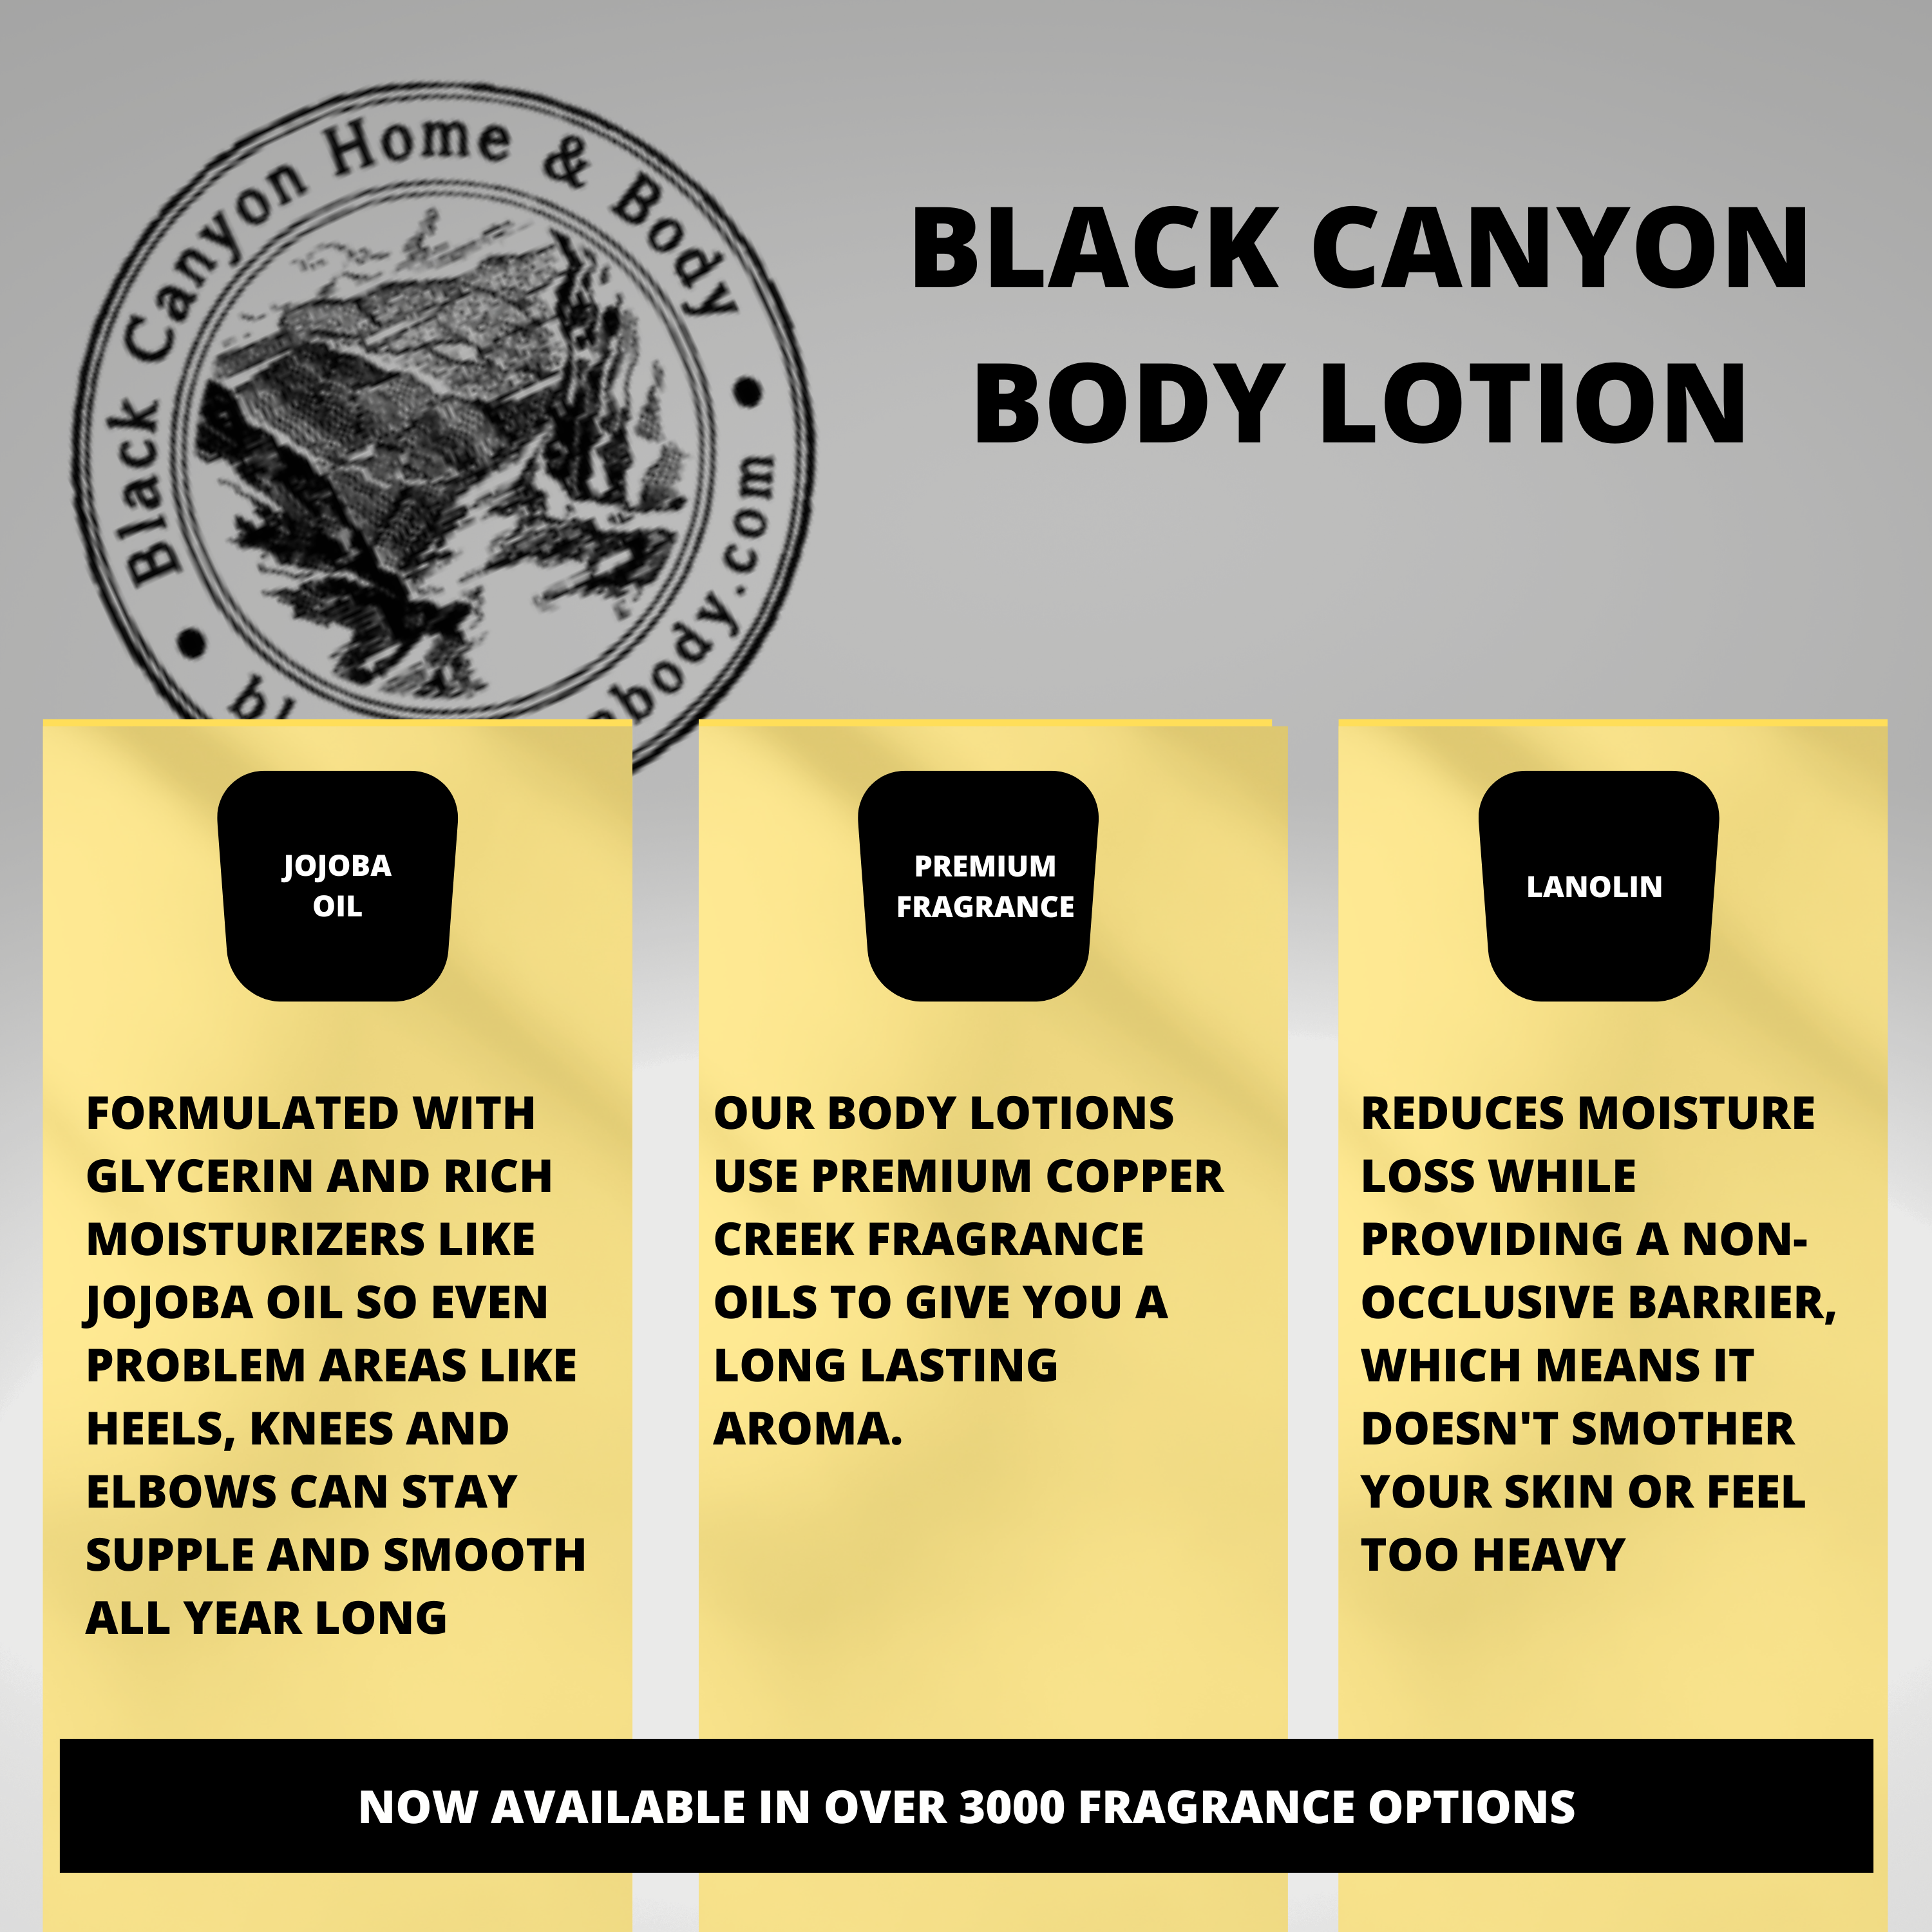 Black Canyon Buttered Popcorn Scented Luxury Body Lotion with Lanolin and Jojoba Oil